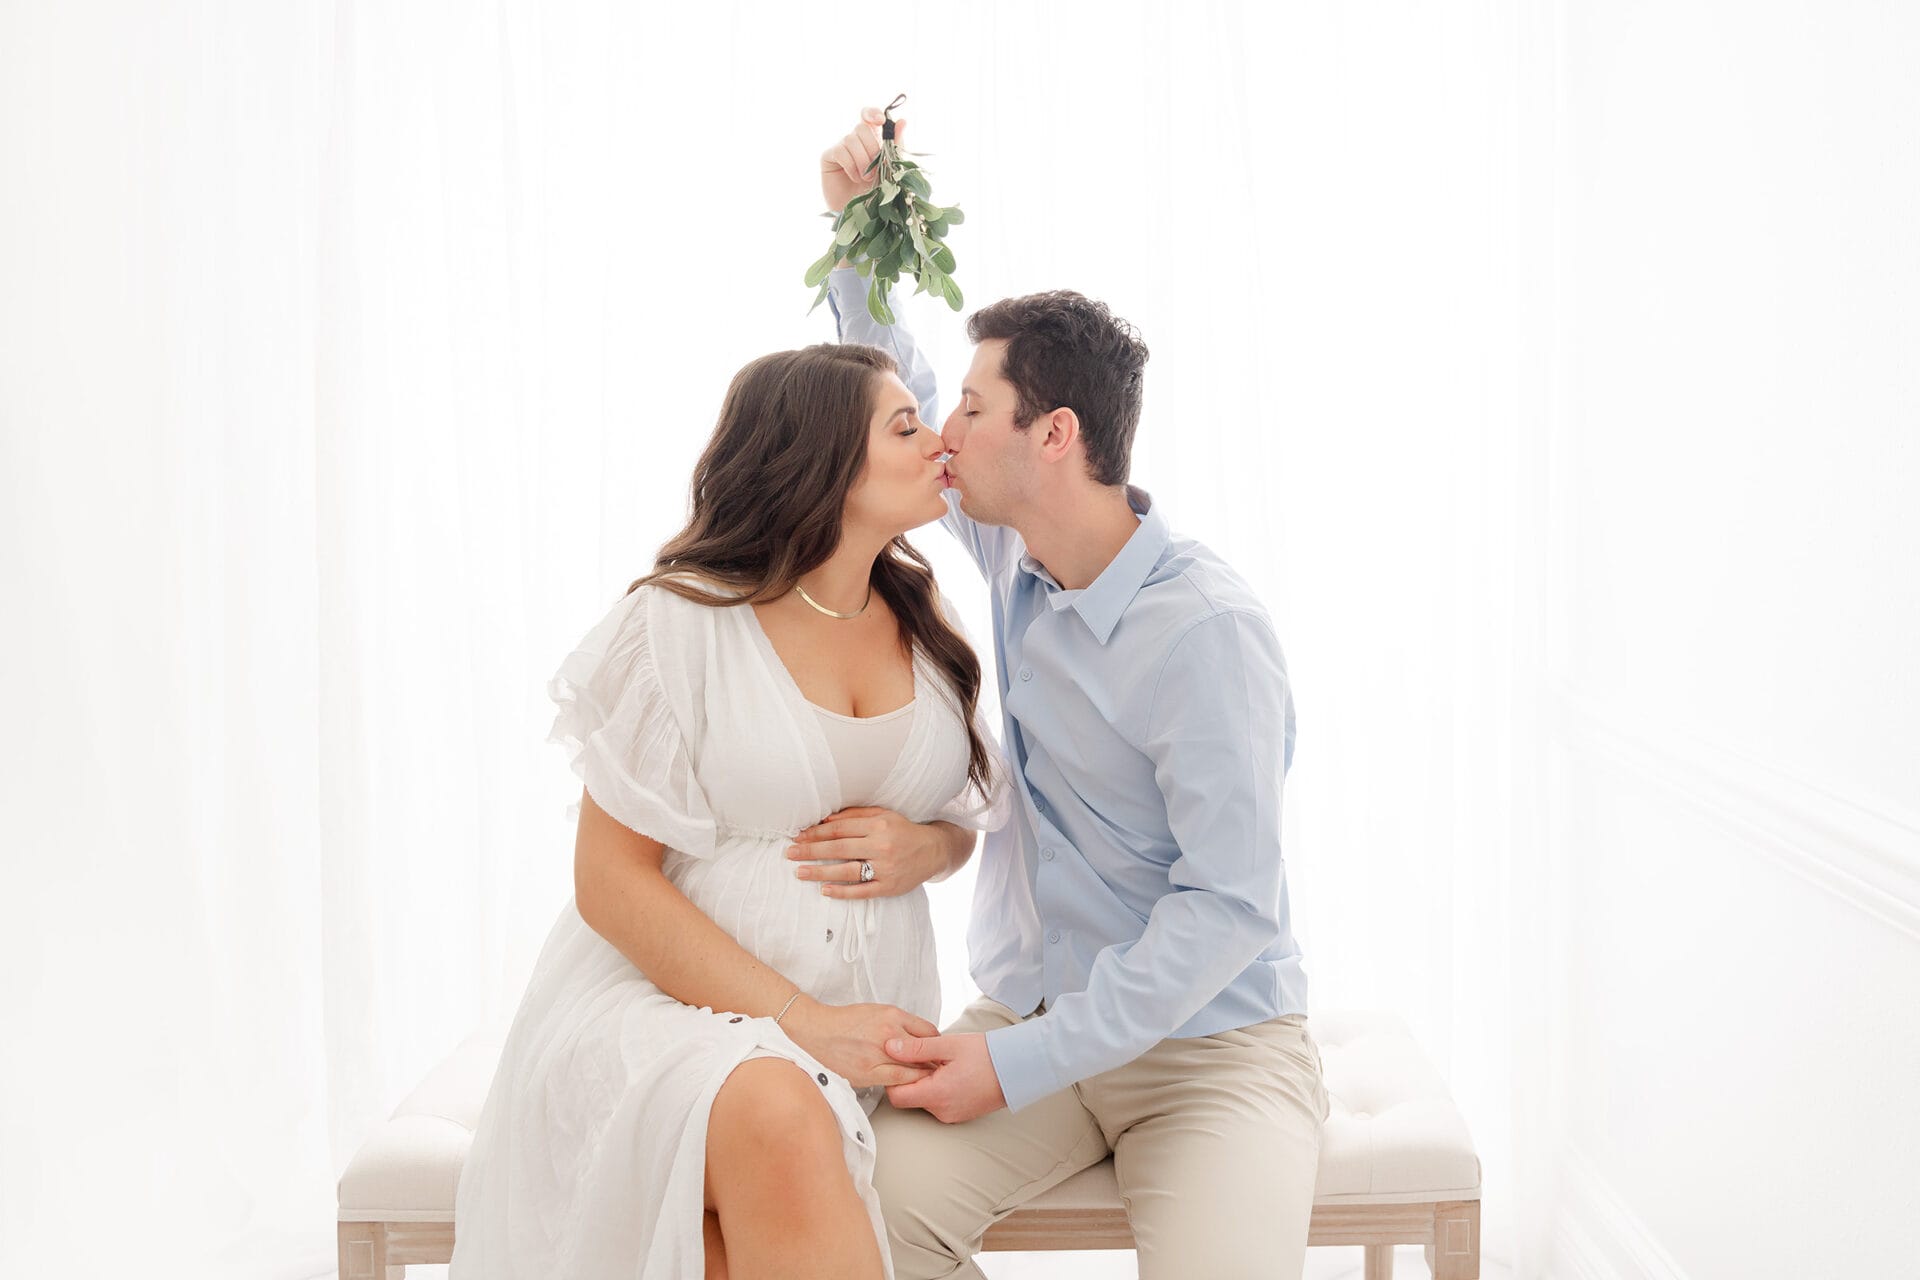 A Pensacola maternity photographer captures a tender moment of a pregnant couple kissing in front of a white background.